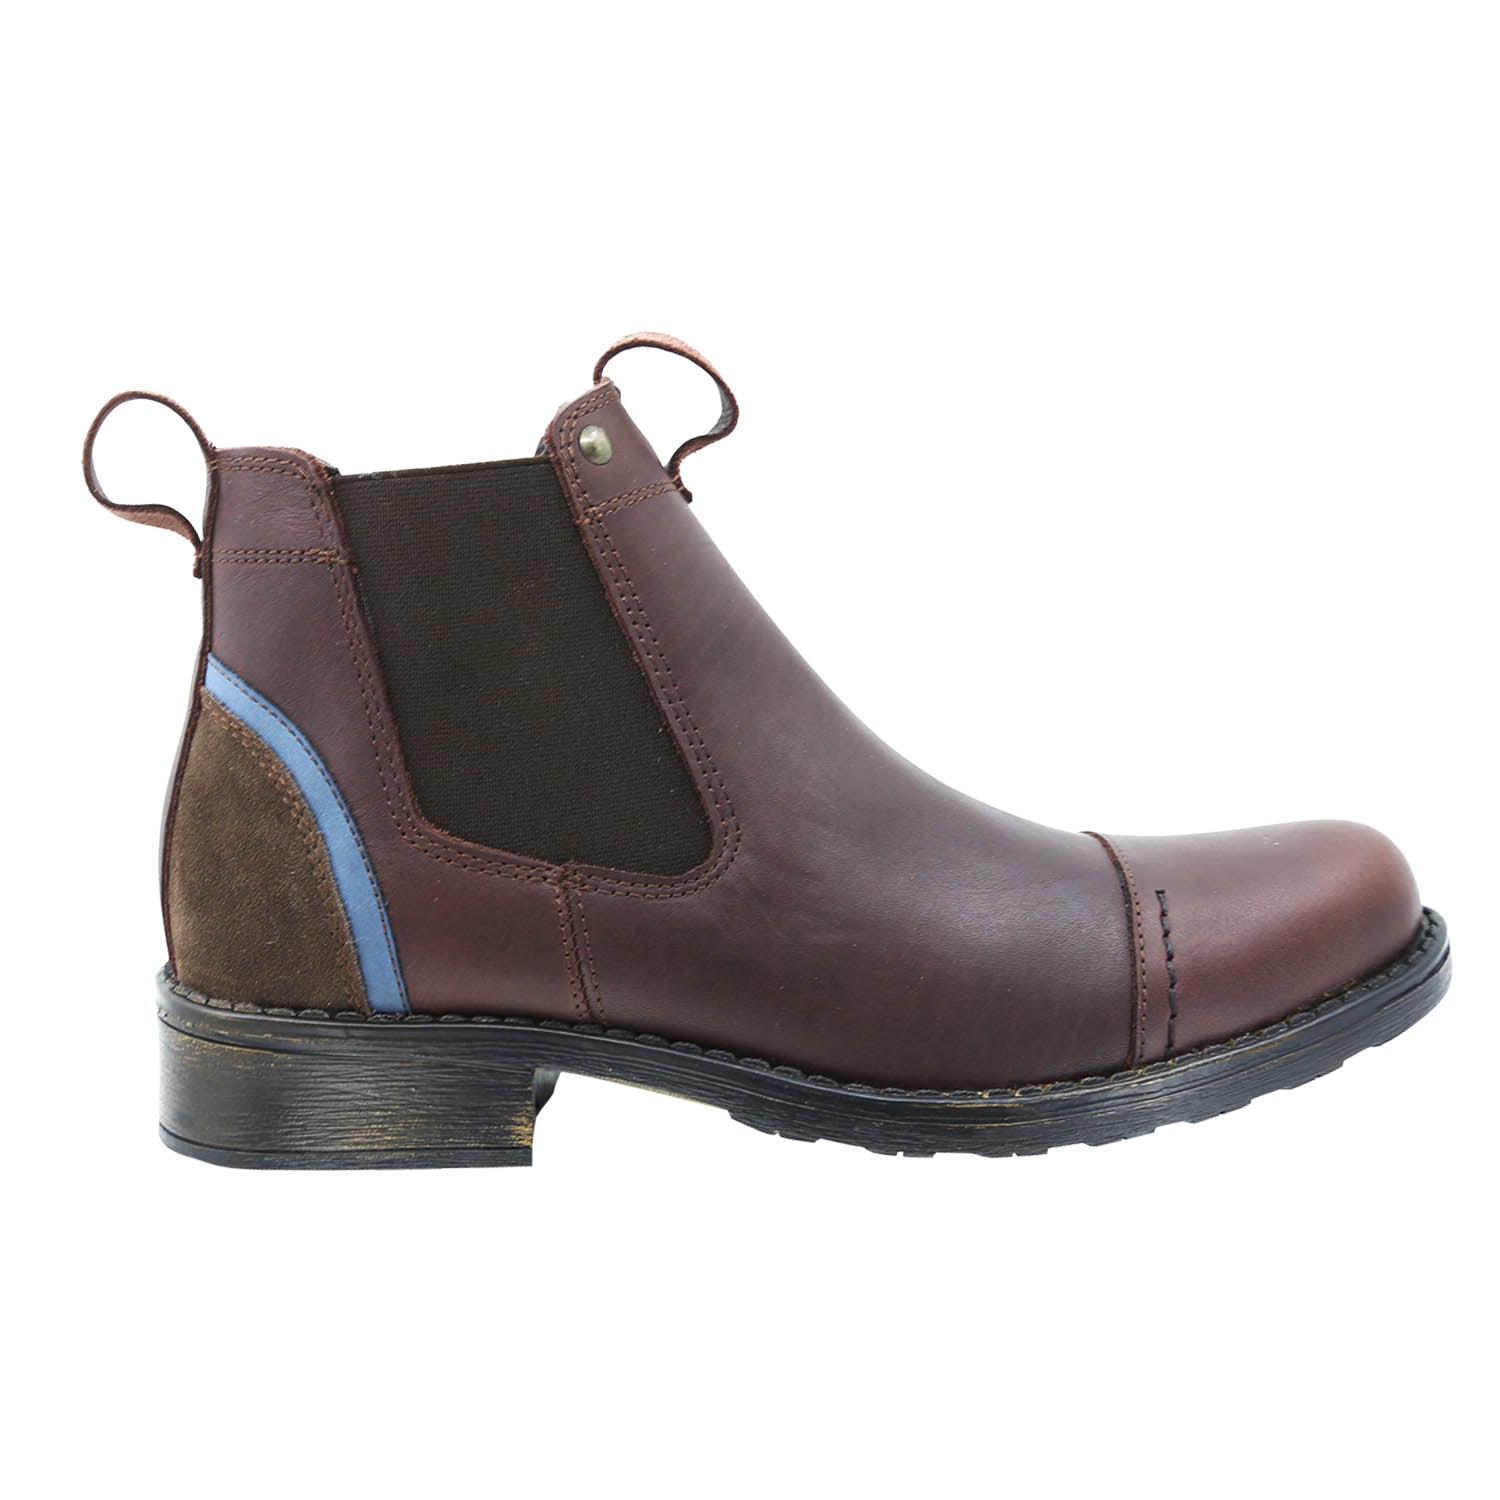 Mens leather boots casual